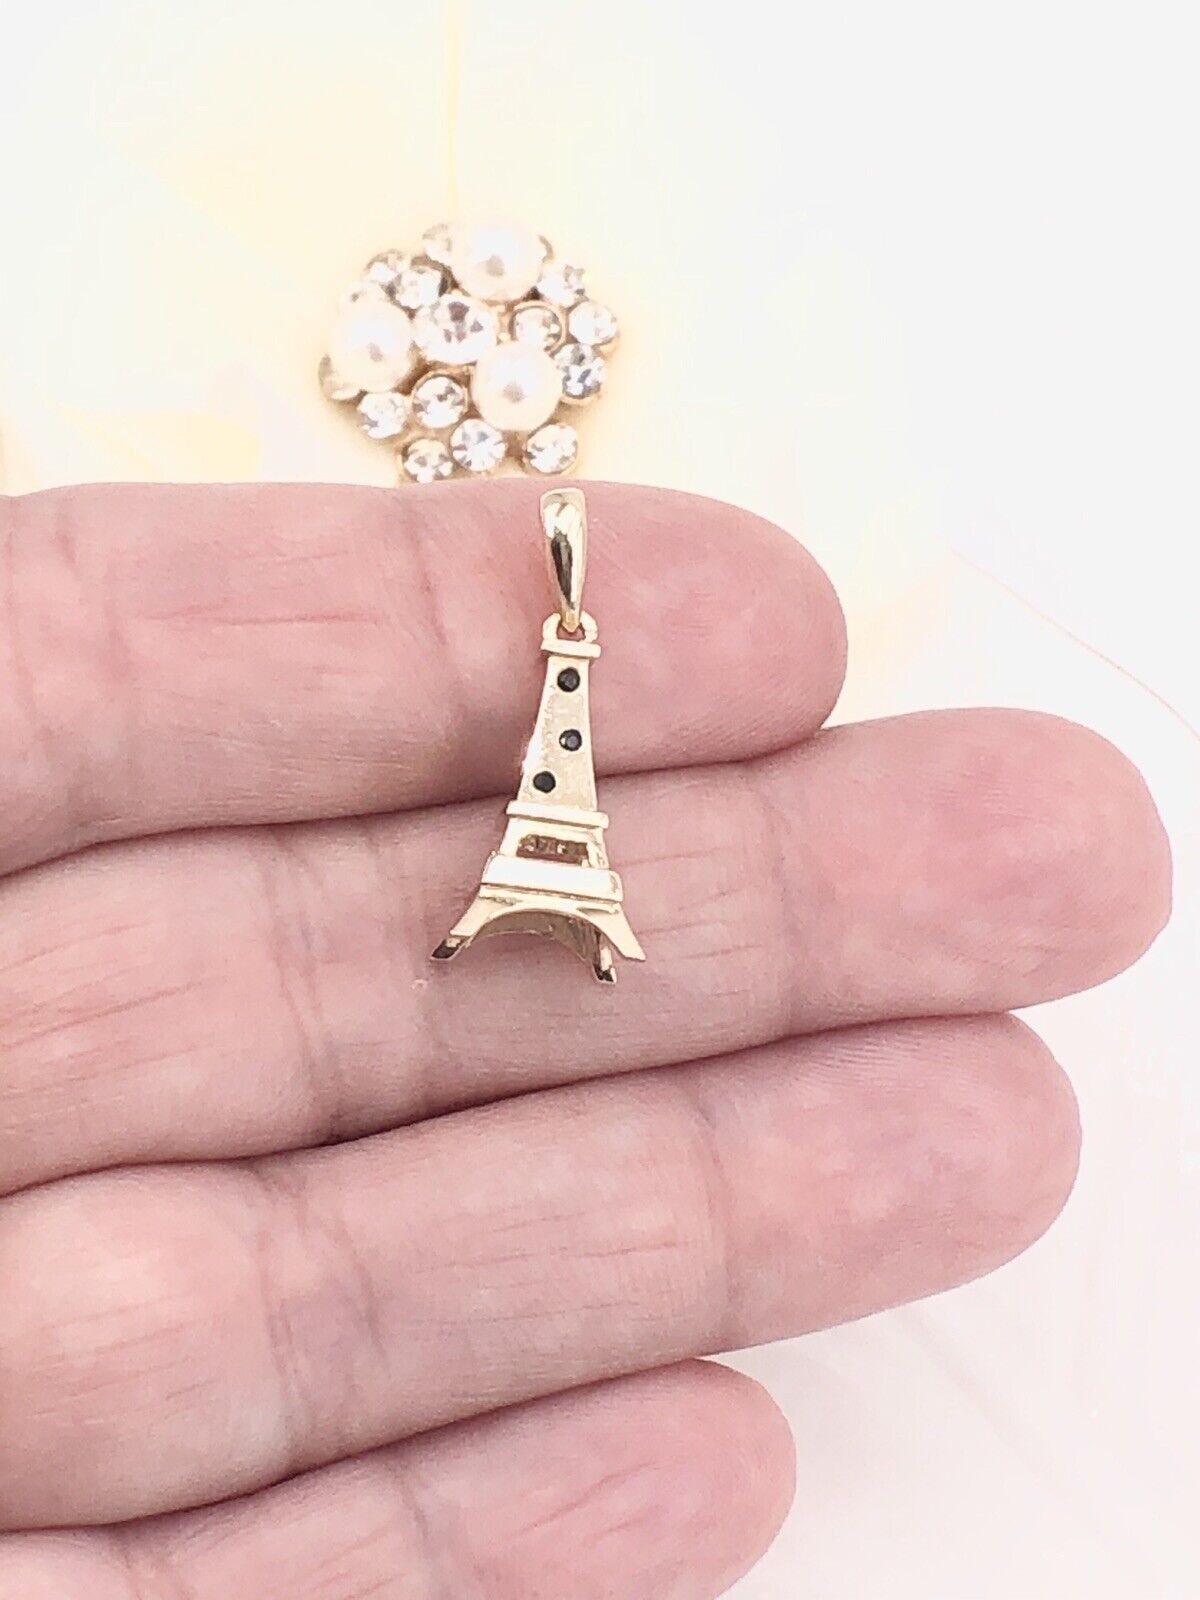 Solid 14K Yellow Gold Eiffel Tower W/ Cubic Zirconia 3-D Pendant/Charm, New